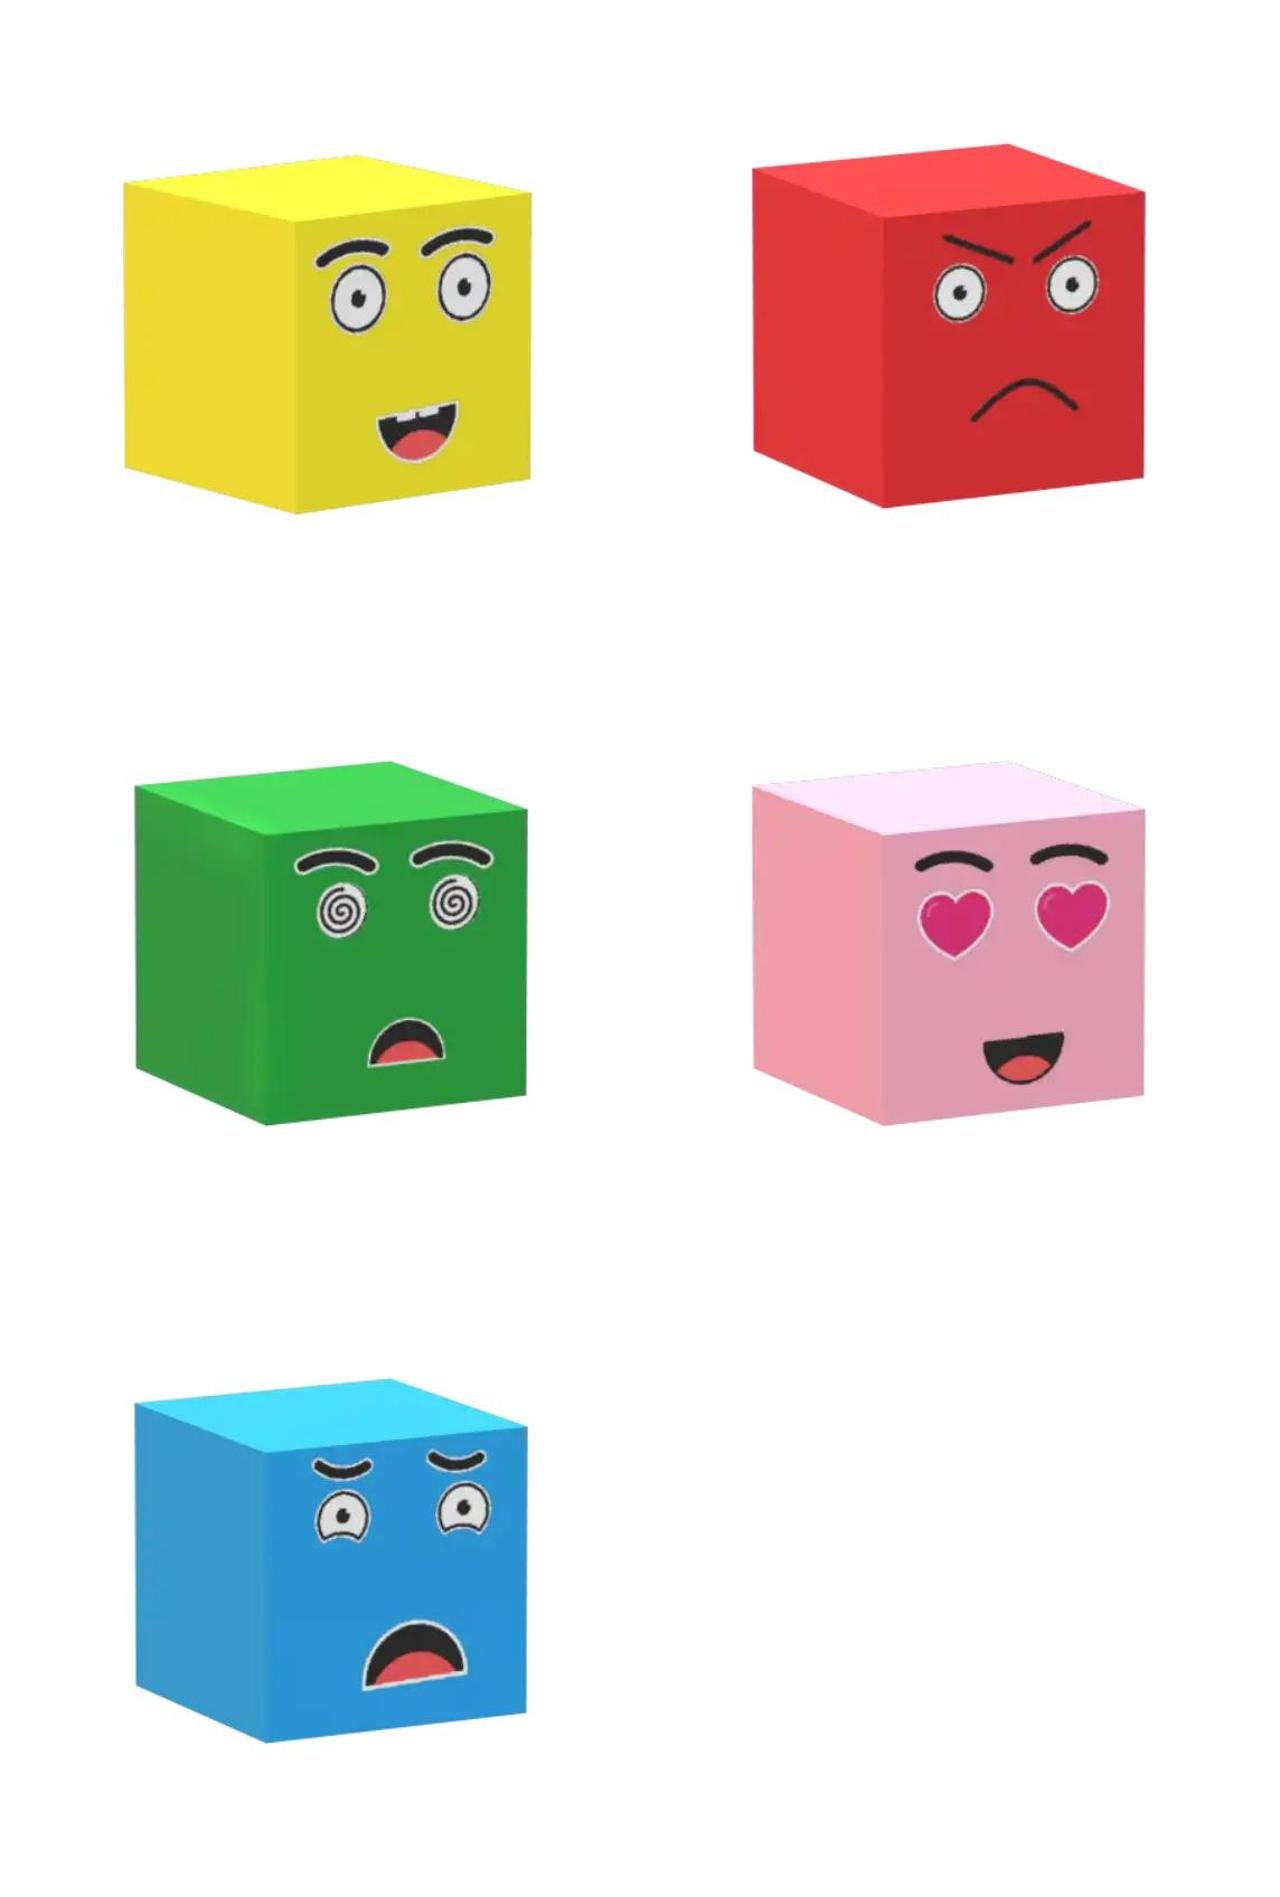 Box Animation/Cartoon,Gag sticker pack for Whatsapp, Telegram, Signal, and others chatting and message apps